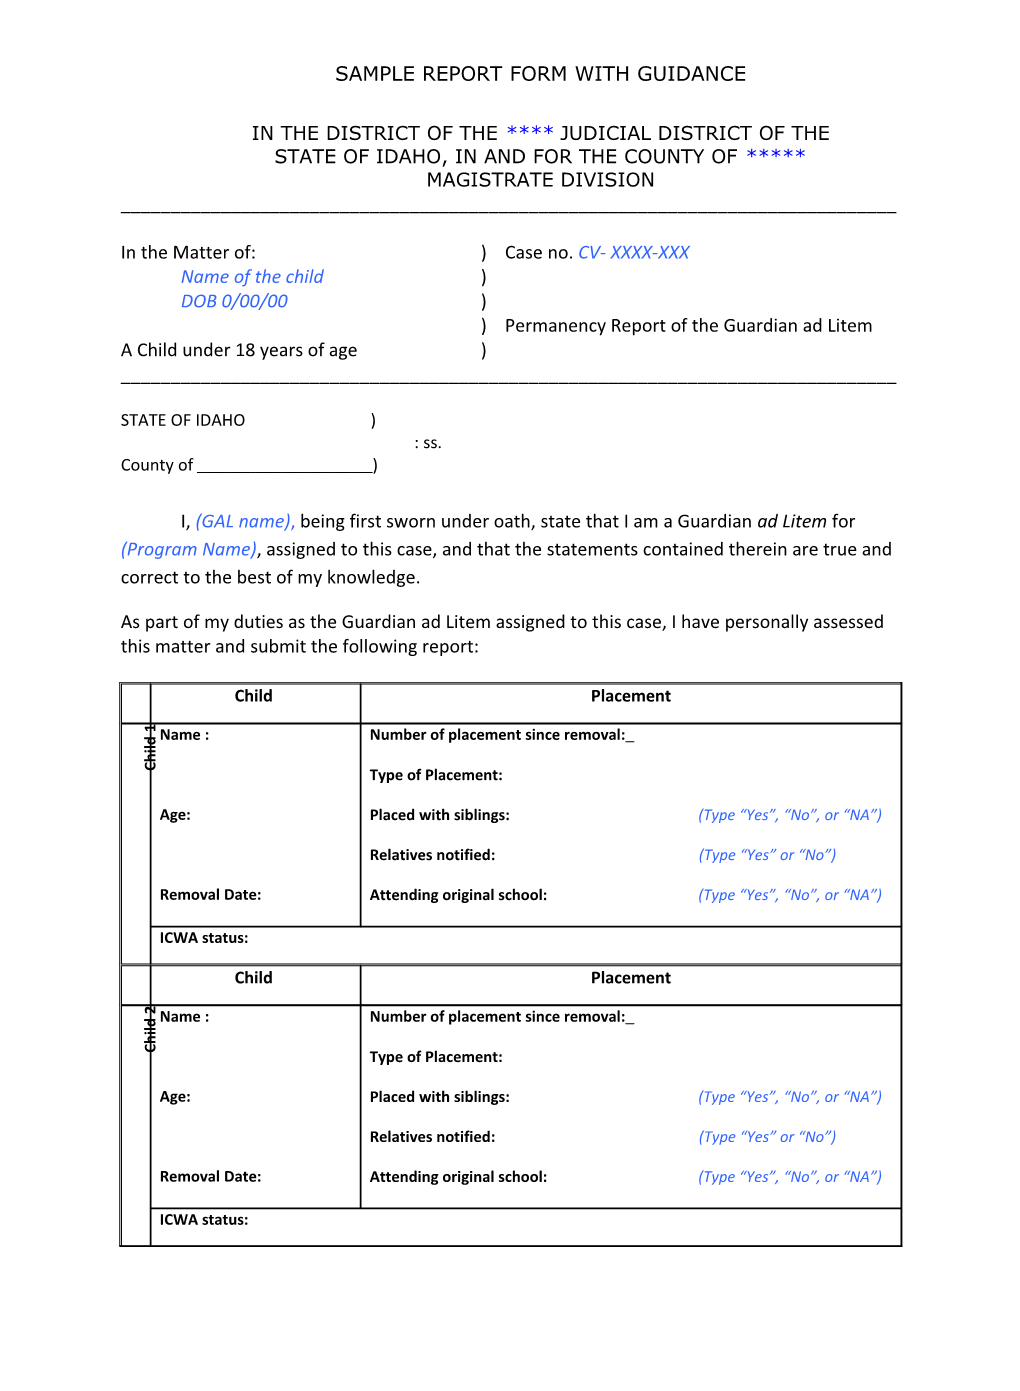 Sample Report Form With Guidance